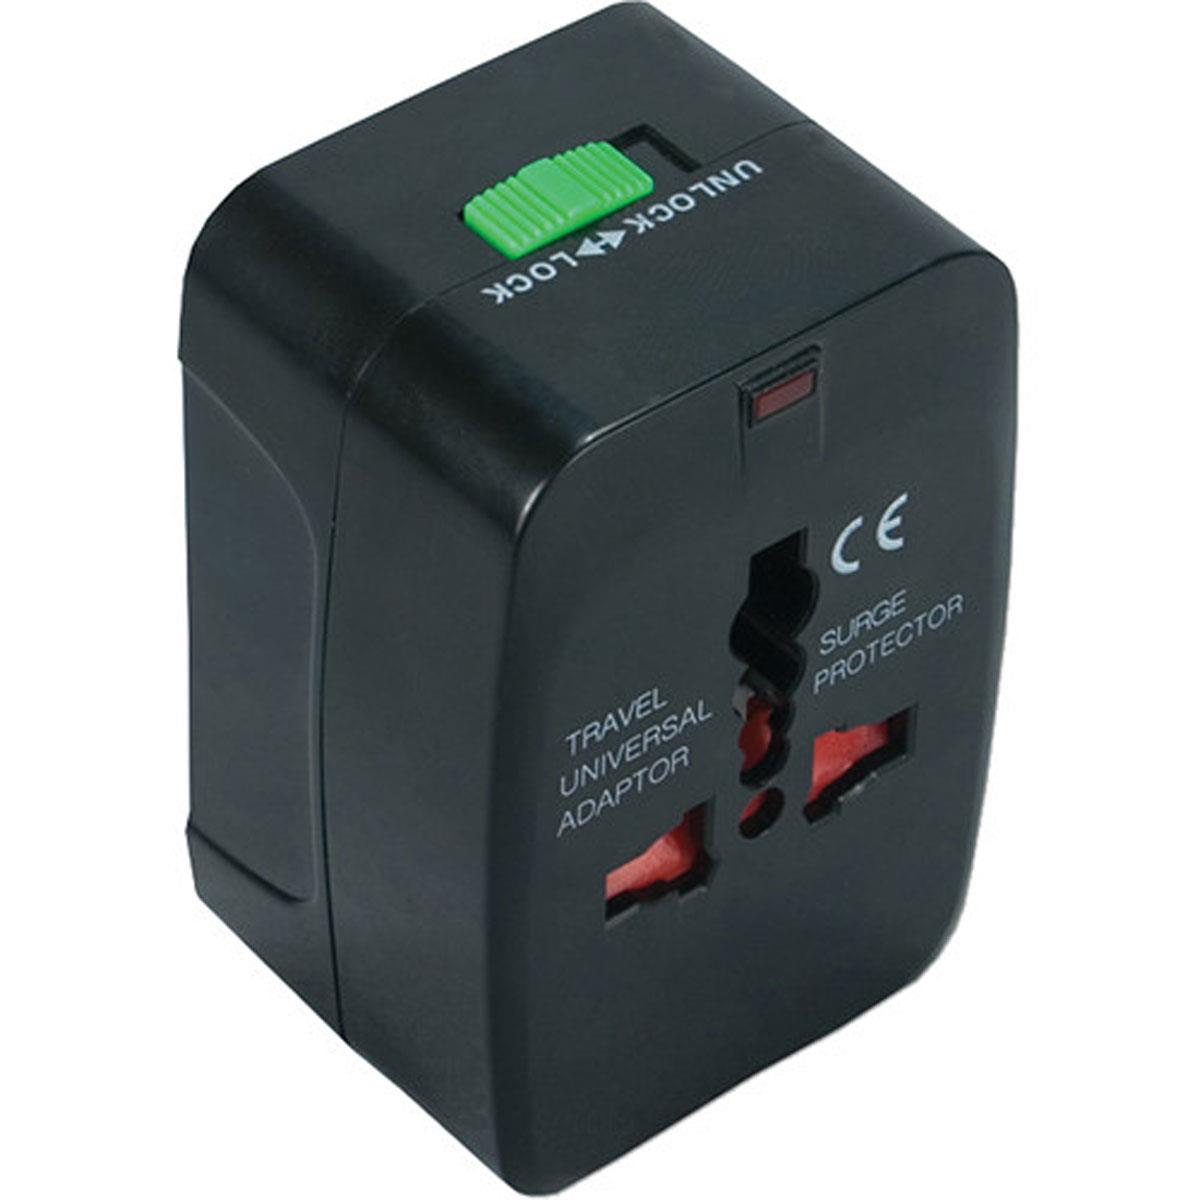 Image of QVS Premium World Travel Power Adapter Kit with Surge Protection